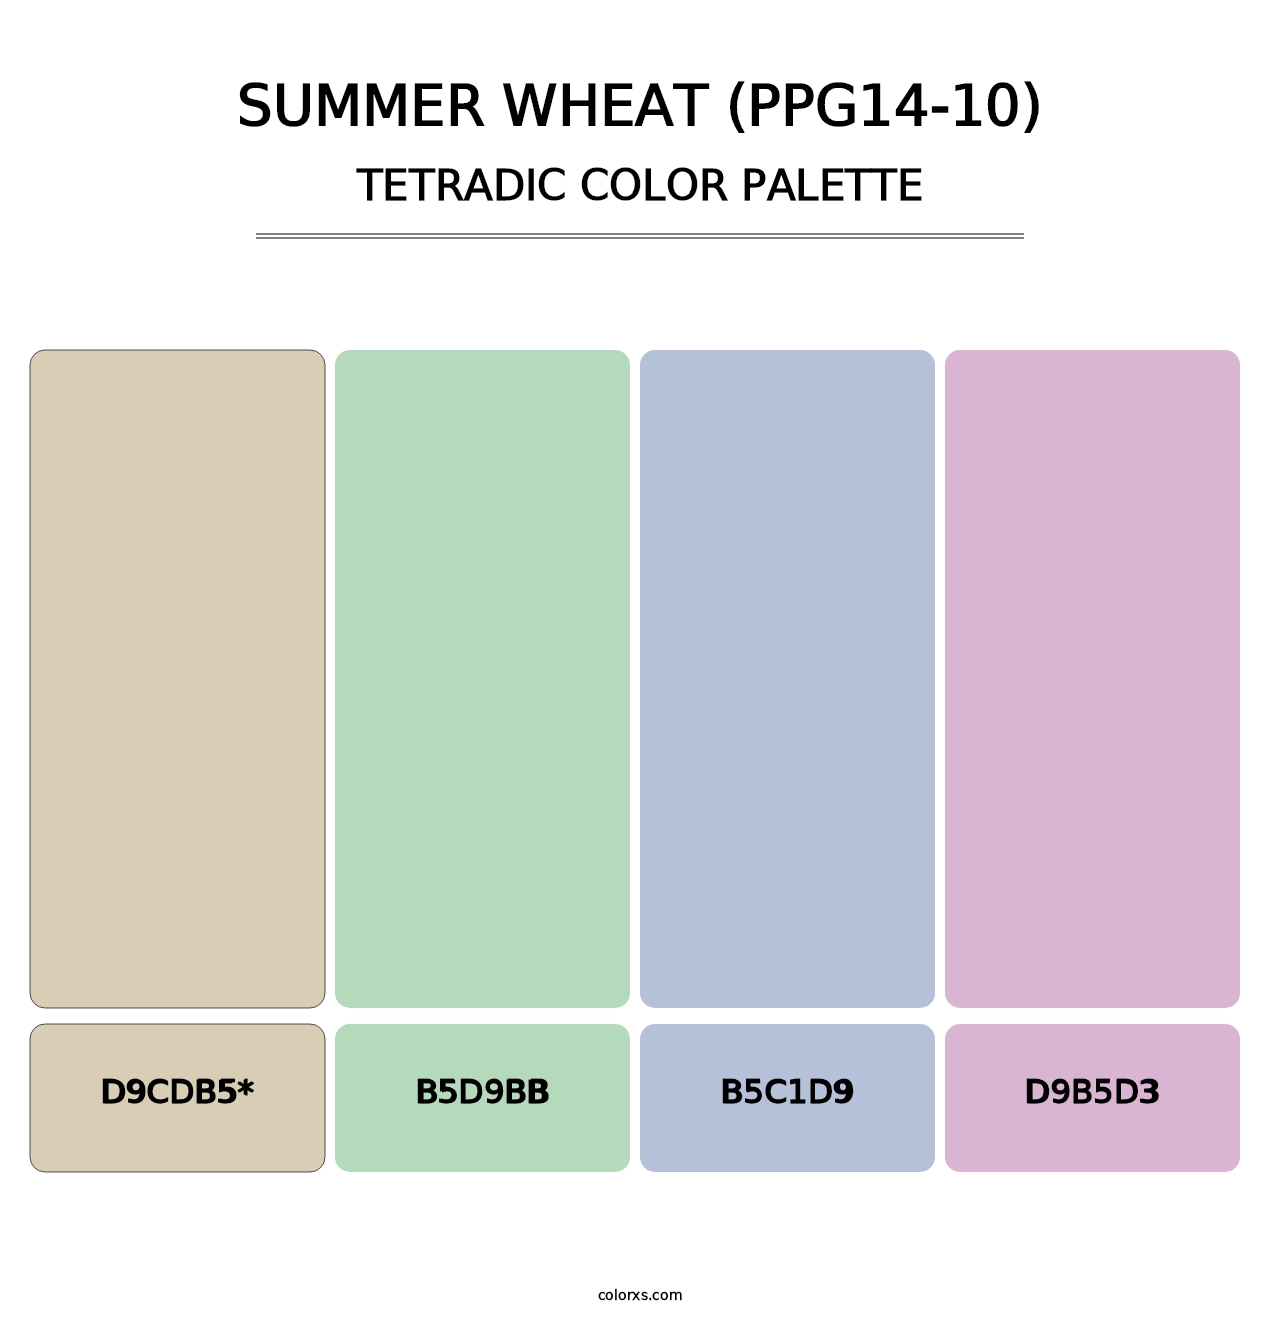 Summer Wheat (PPG14-10) - Tetradic Color Palette